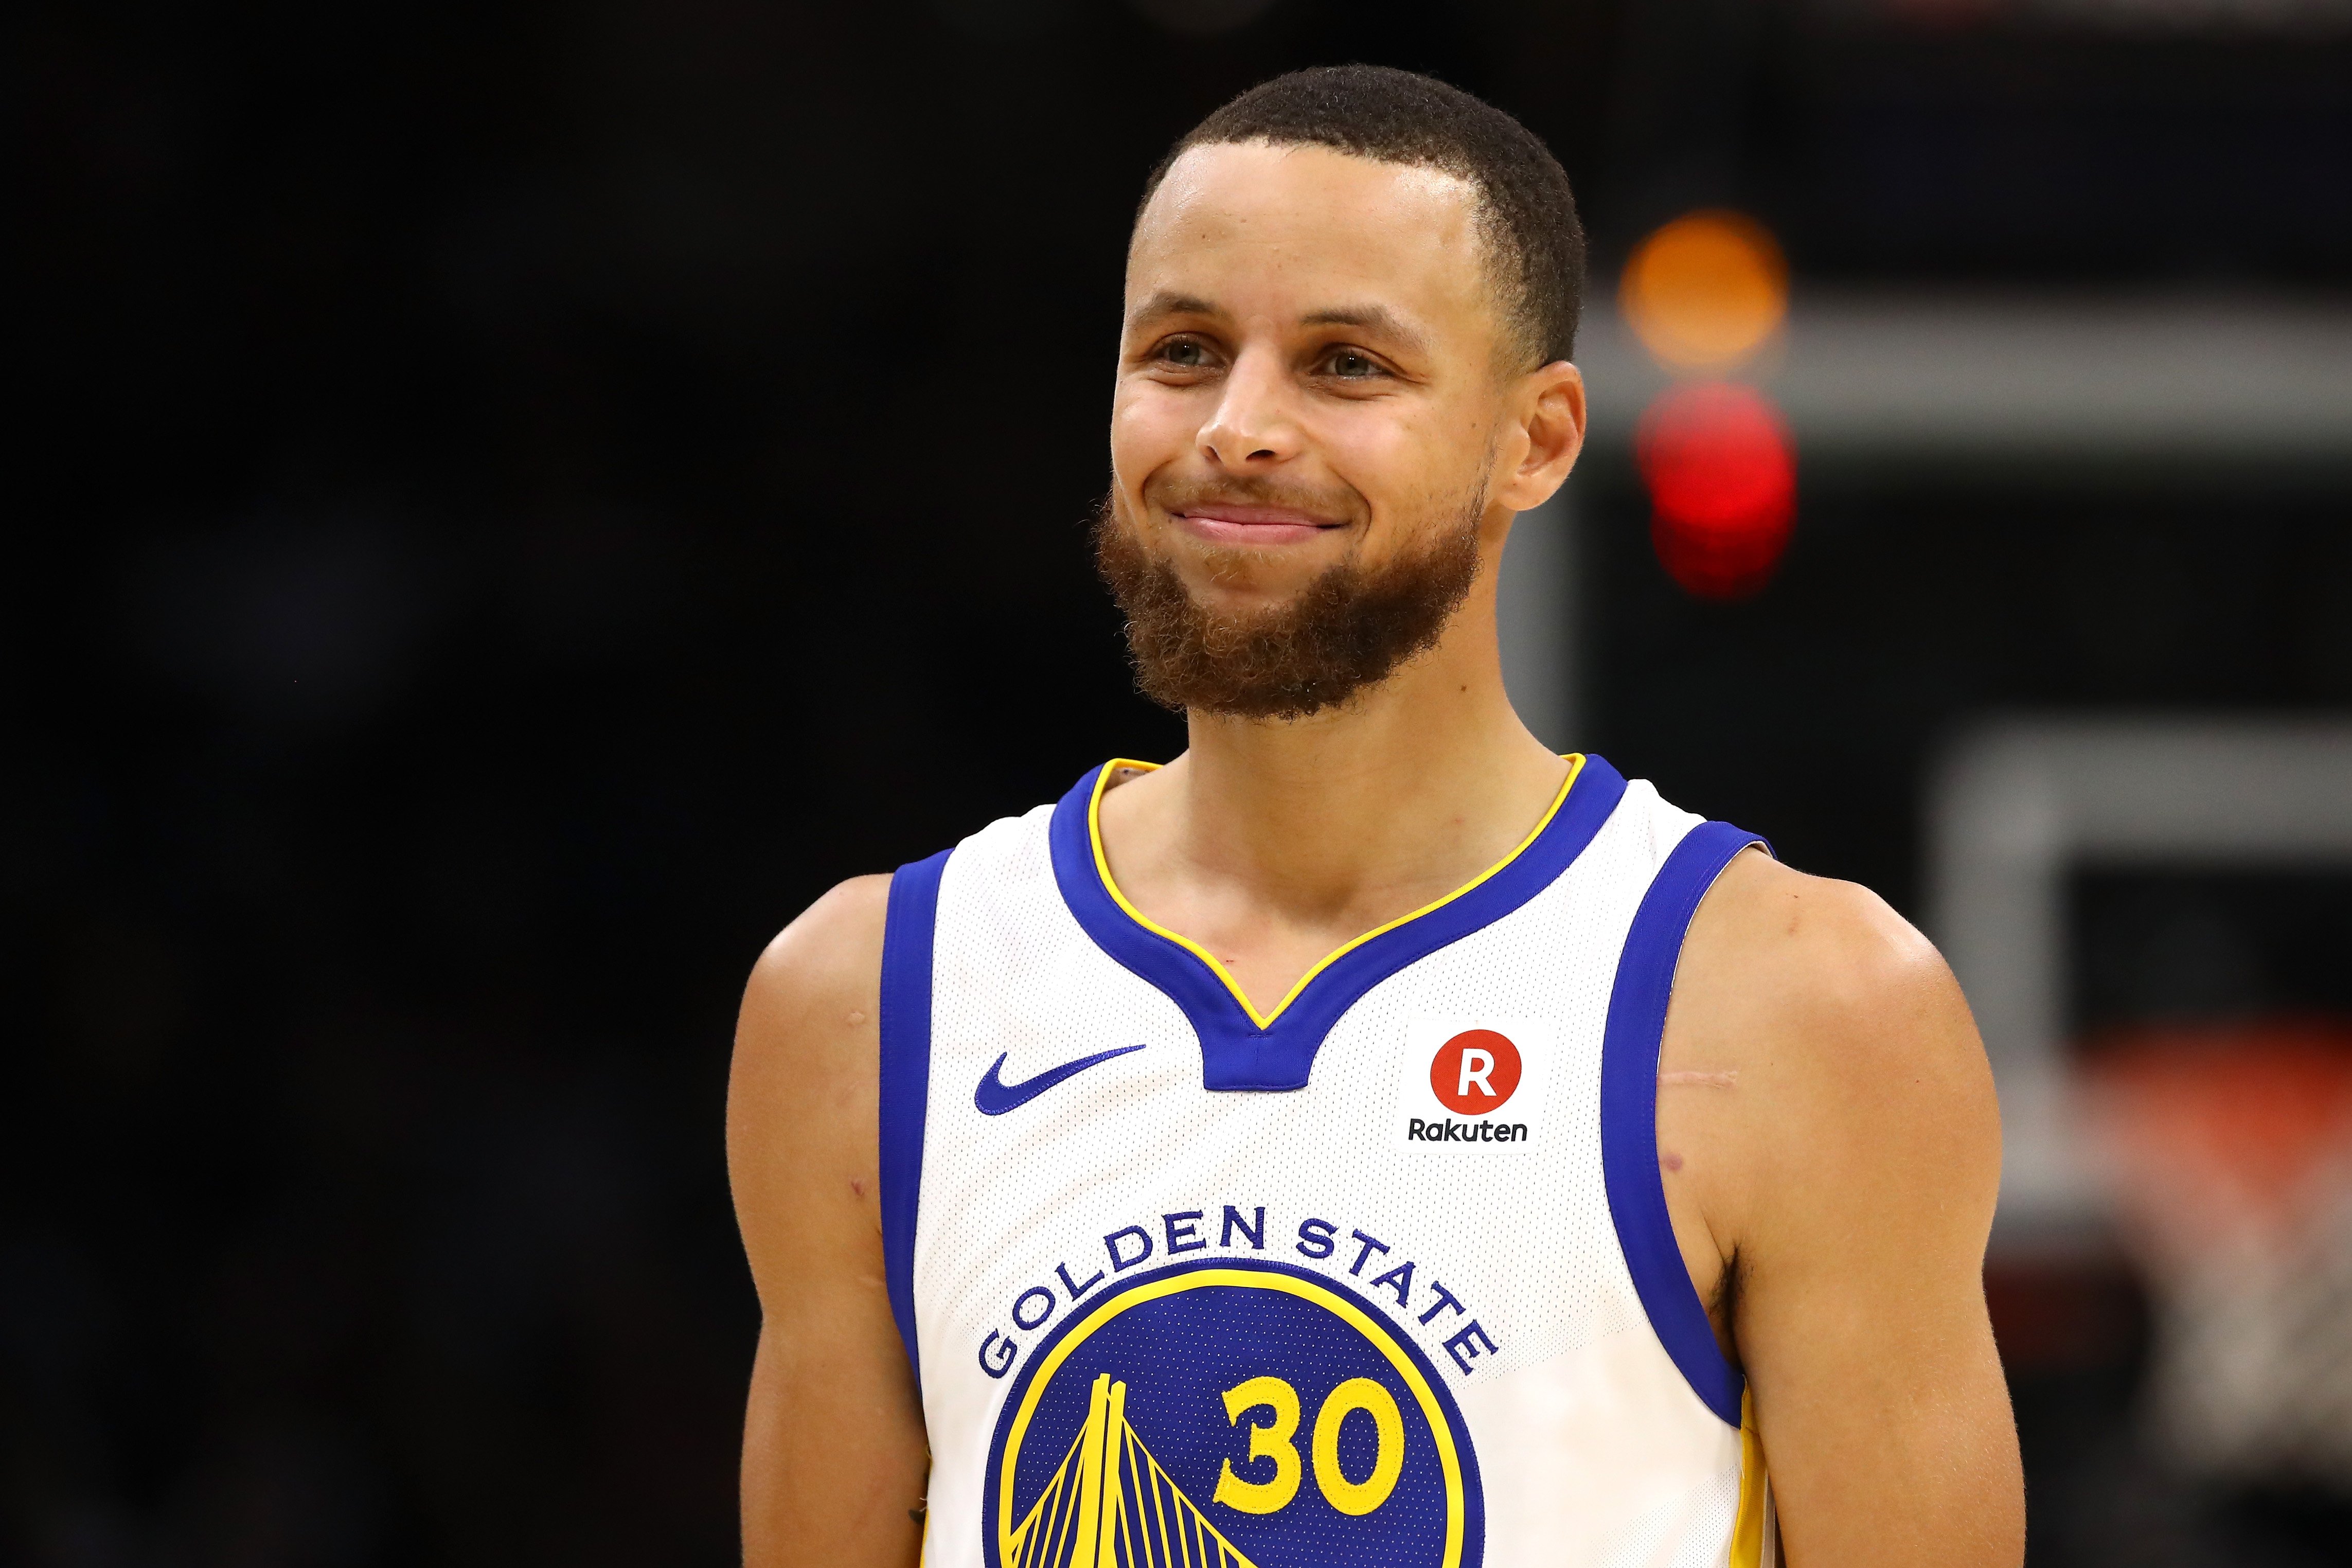 Stephen Curry during a game against the Cleveland Cavaliers at the 2018 NBA Finals on June 8, 2018 | Photo: Getty Images